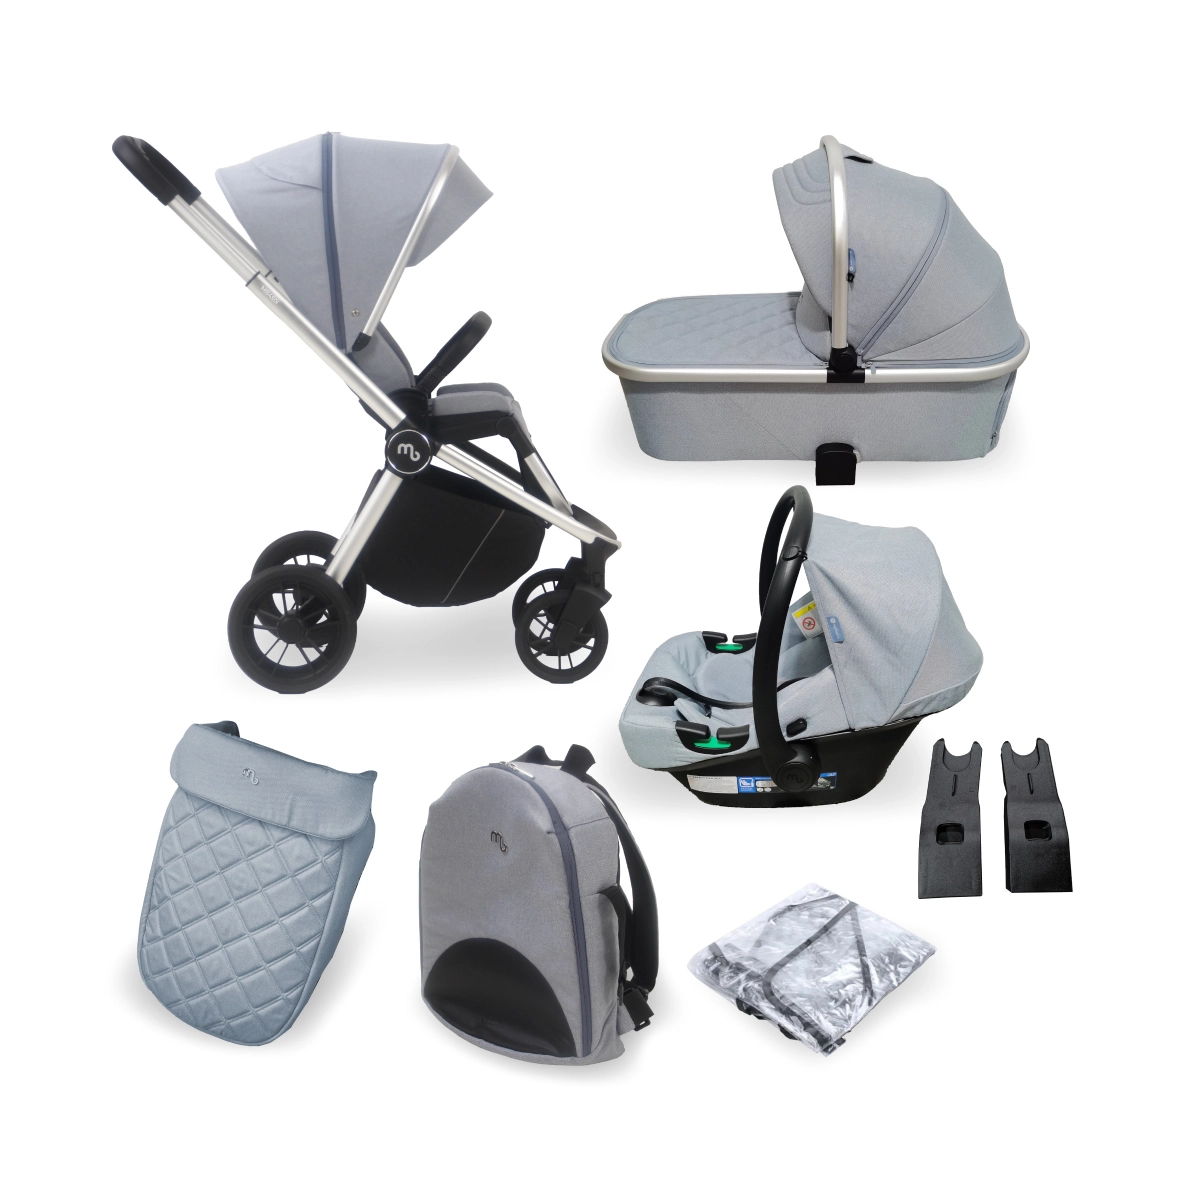 My Babiie MB450i Samantha Faiers 3 in 1 Travel System